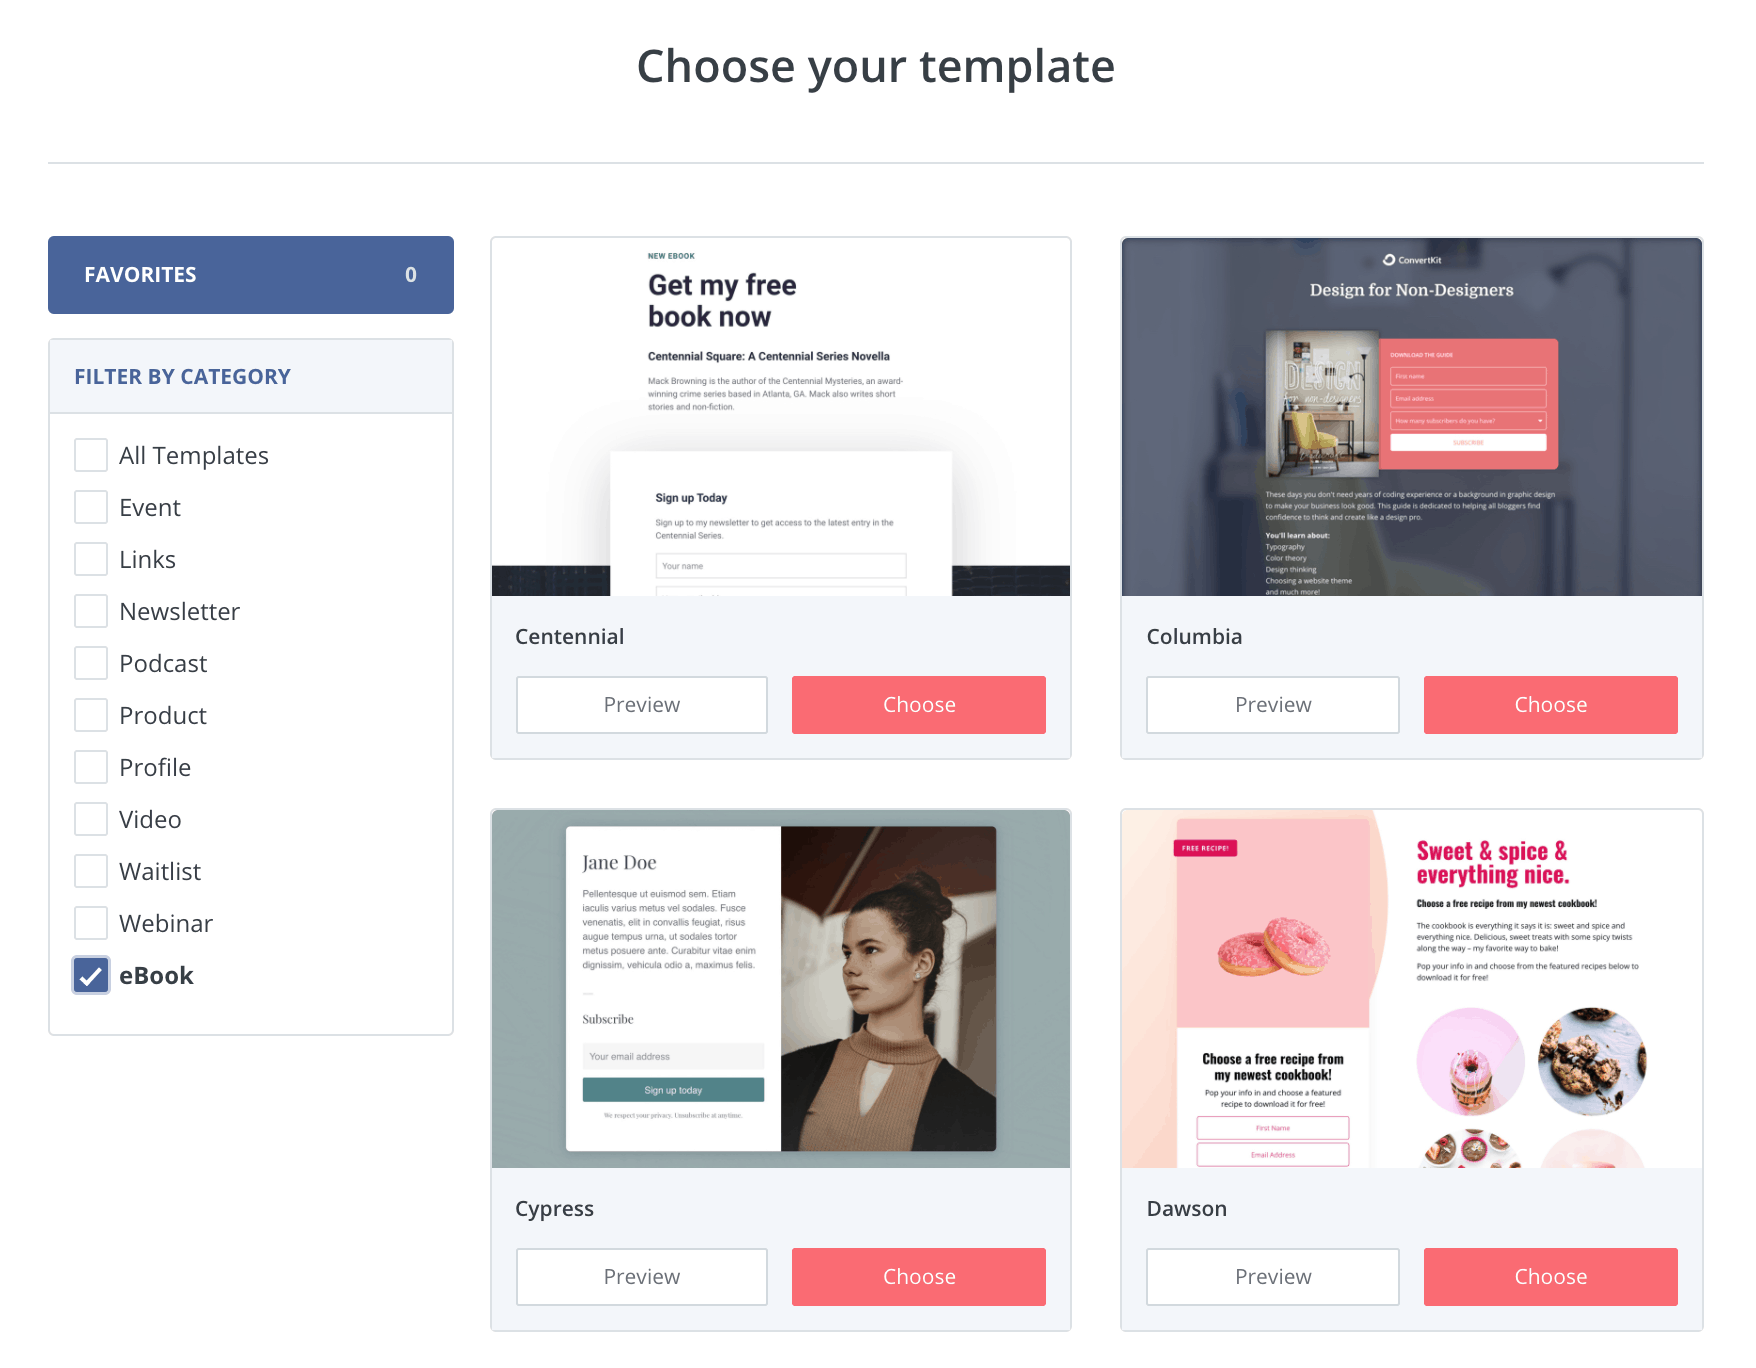 And there are loads of templates to choose from with ConvertKit